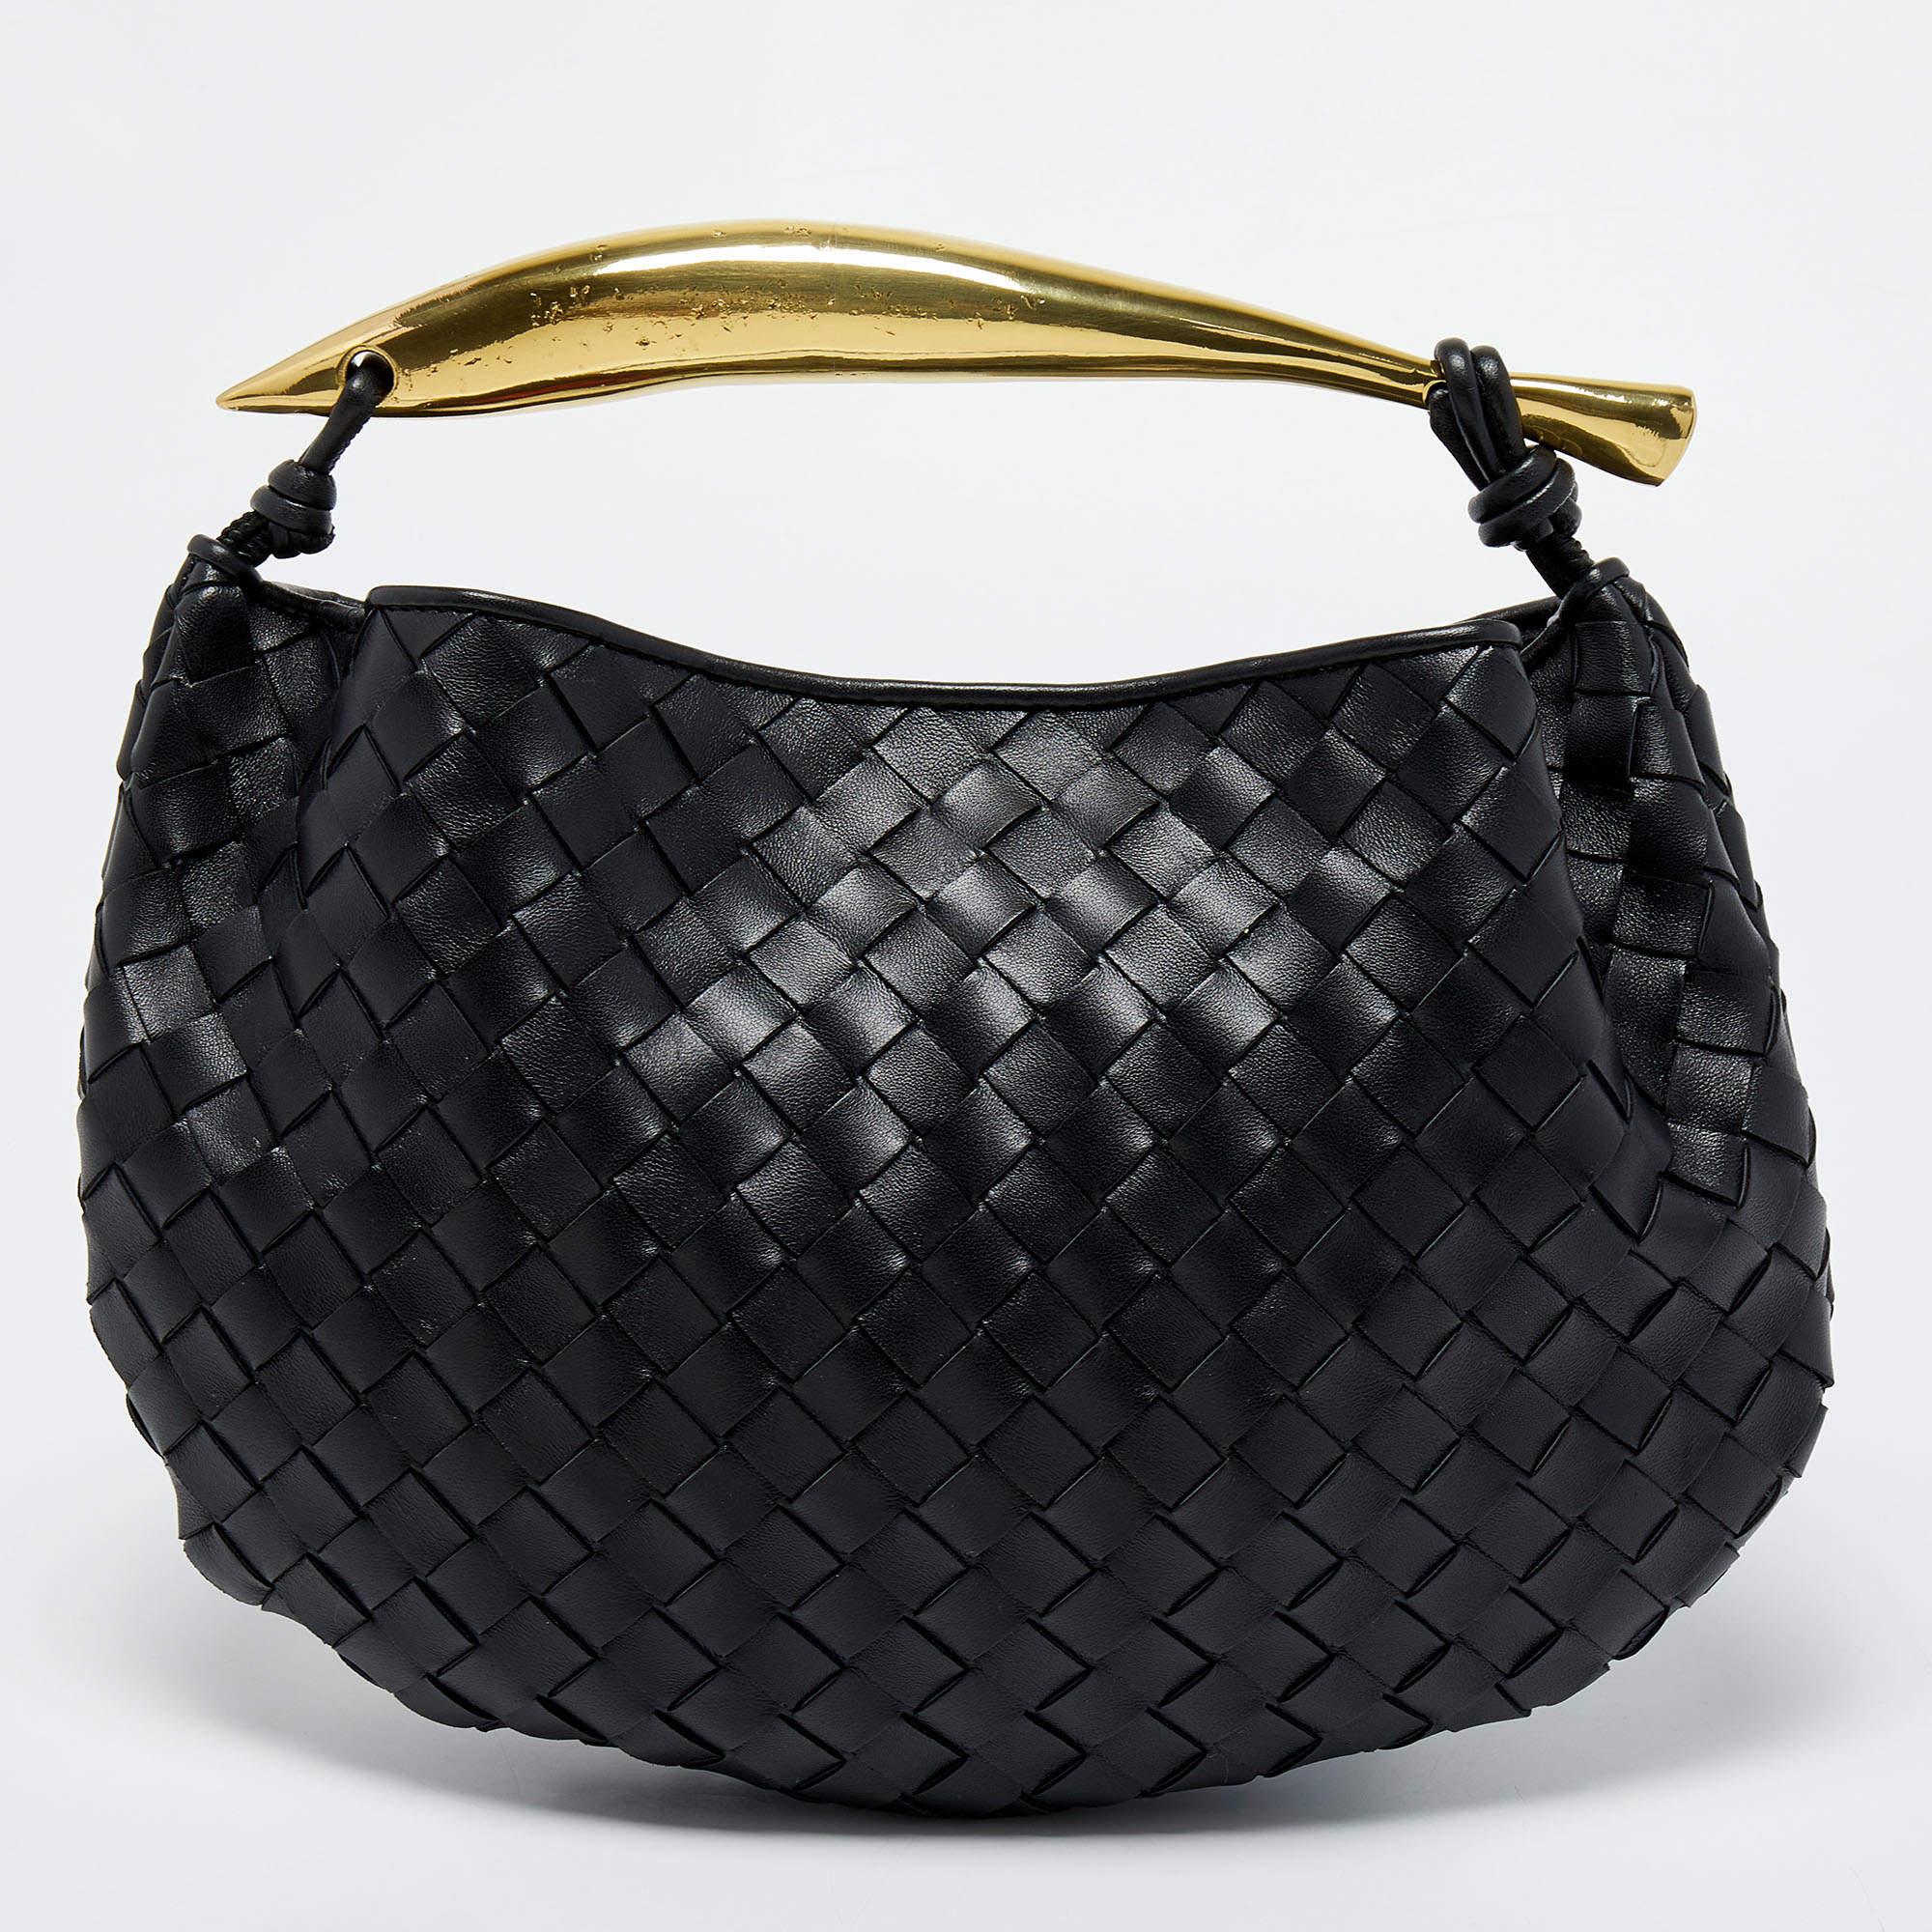 This hobo from Bottega Veneta has been designed to be a worthy style companion! Crafted from Intrecciato leather, the bag features a spacious interior and a gold-tone handle.

Includes: Original Dustbag, Info Booklet
